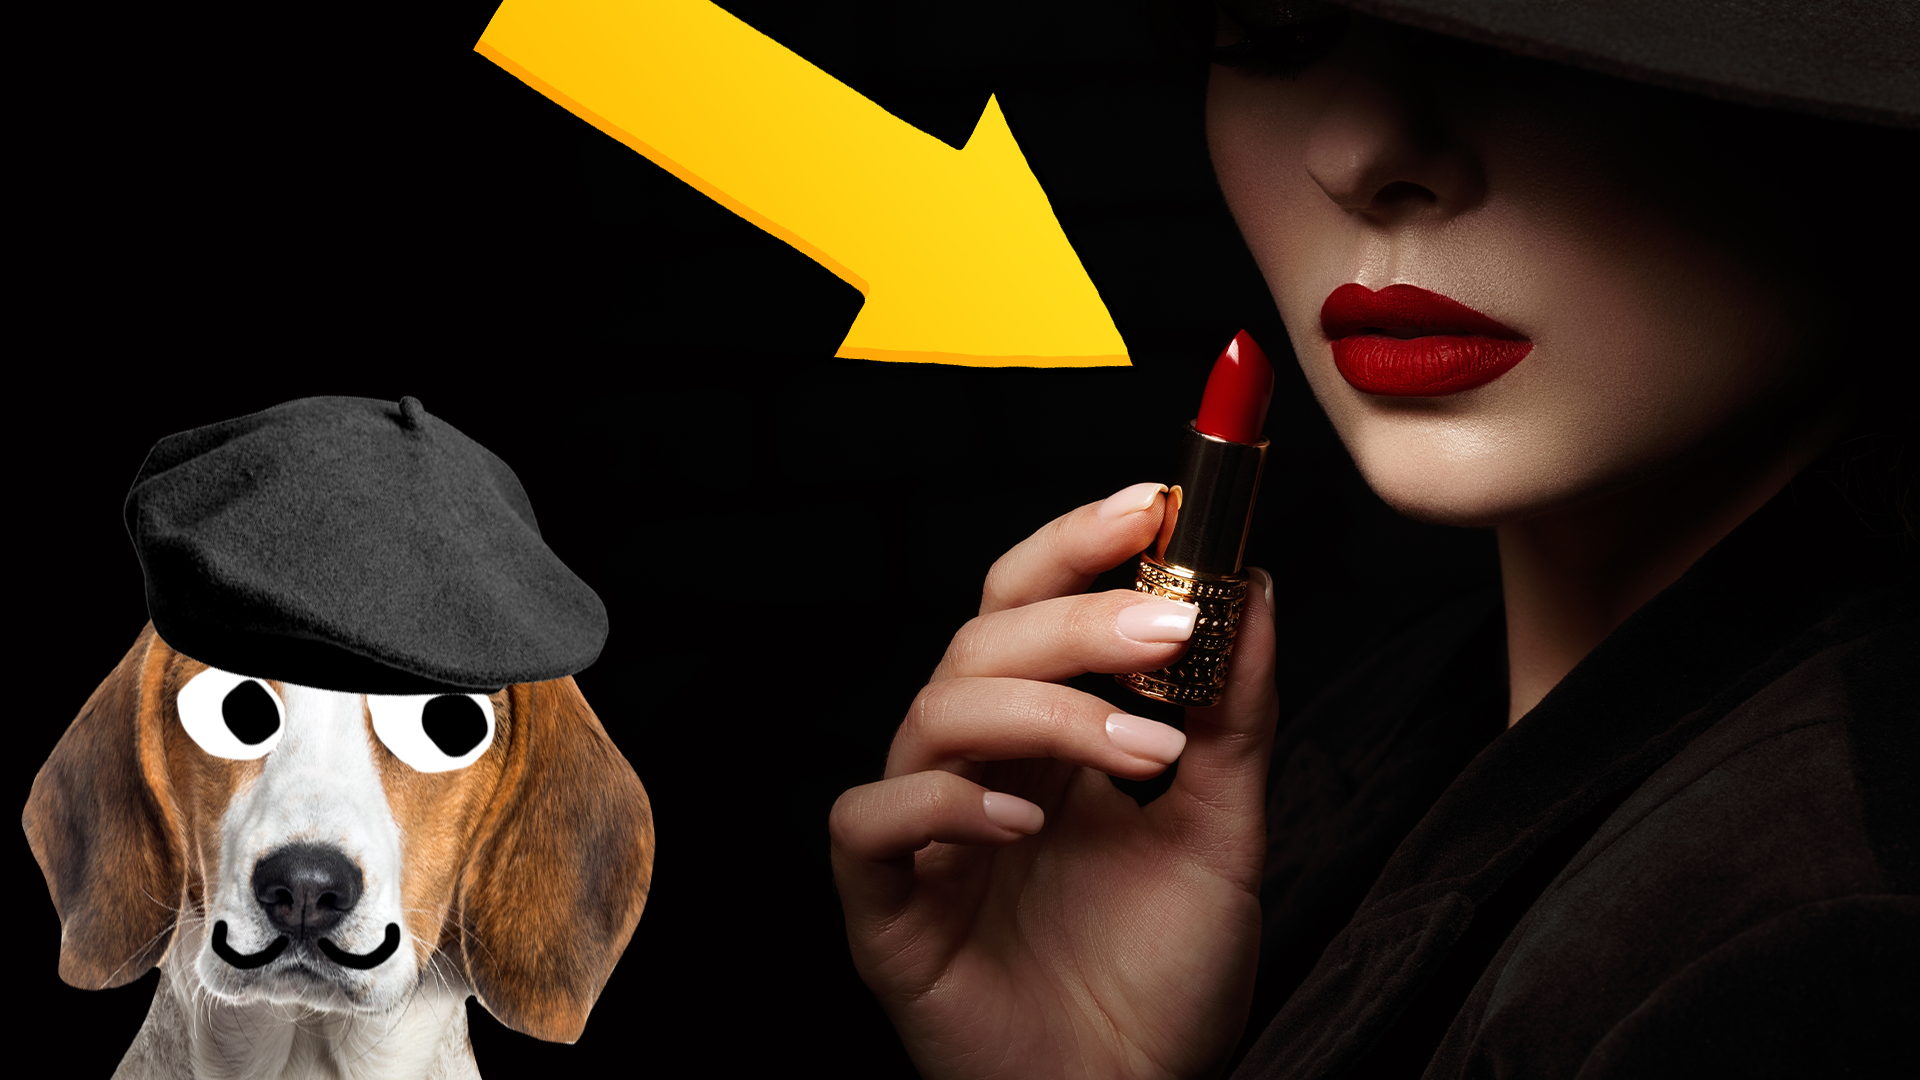 Mysterious woman and mysterious dog and a lipstick